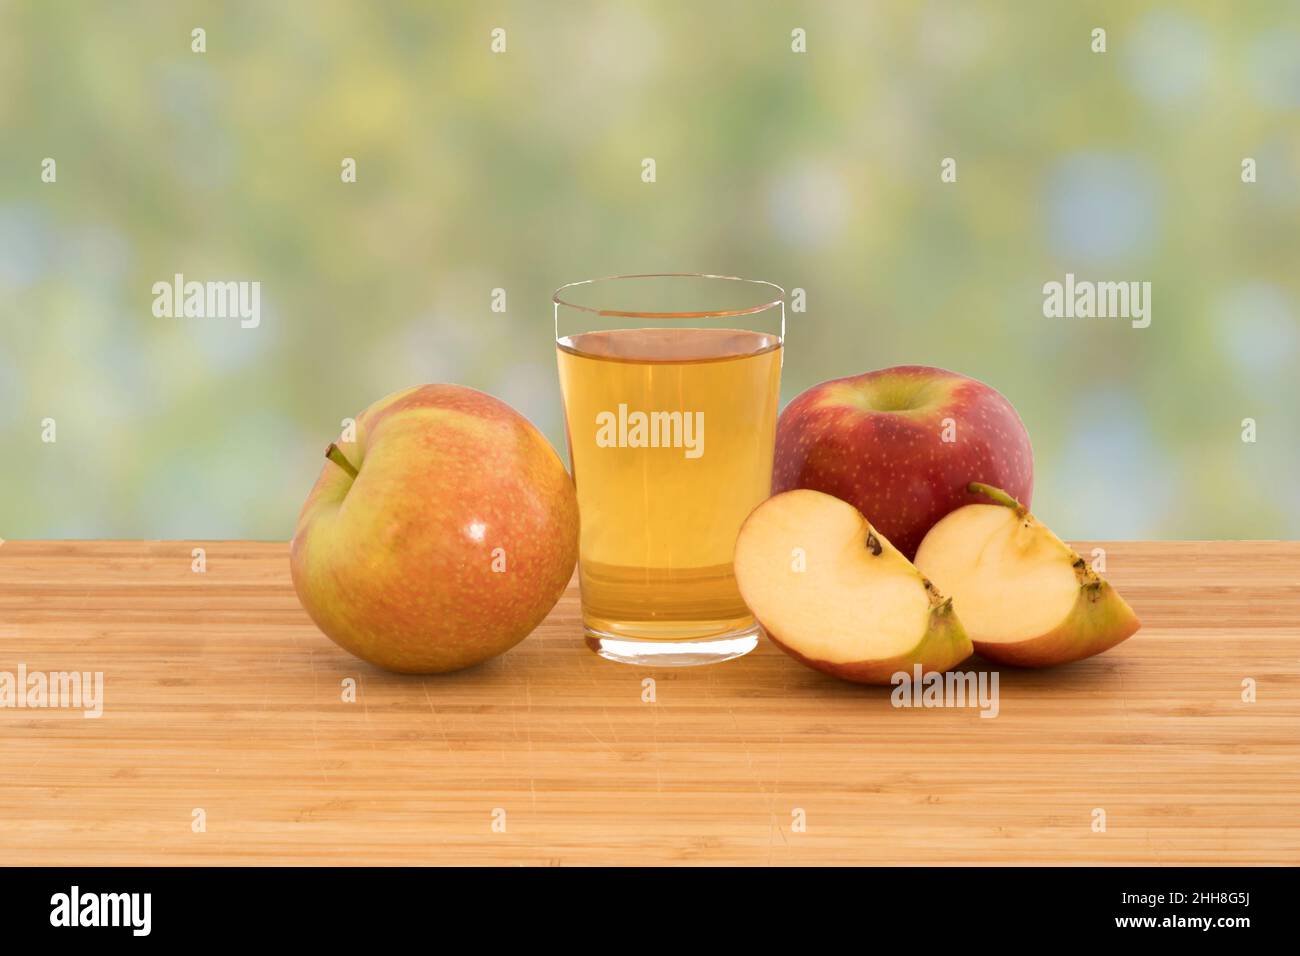 A glass of apple juice with apples and apple slices on a wooden cutting board isolated on a green bokeh background Stock Photo